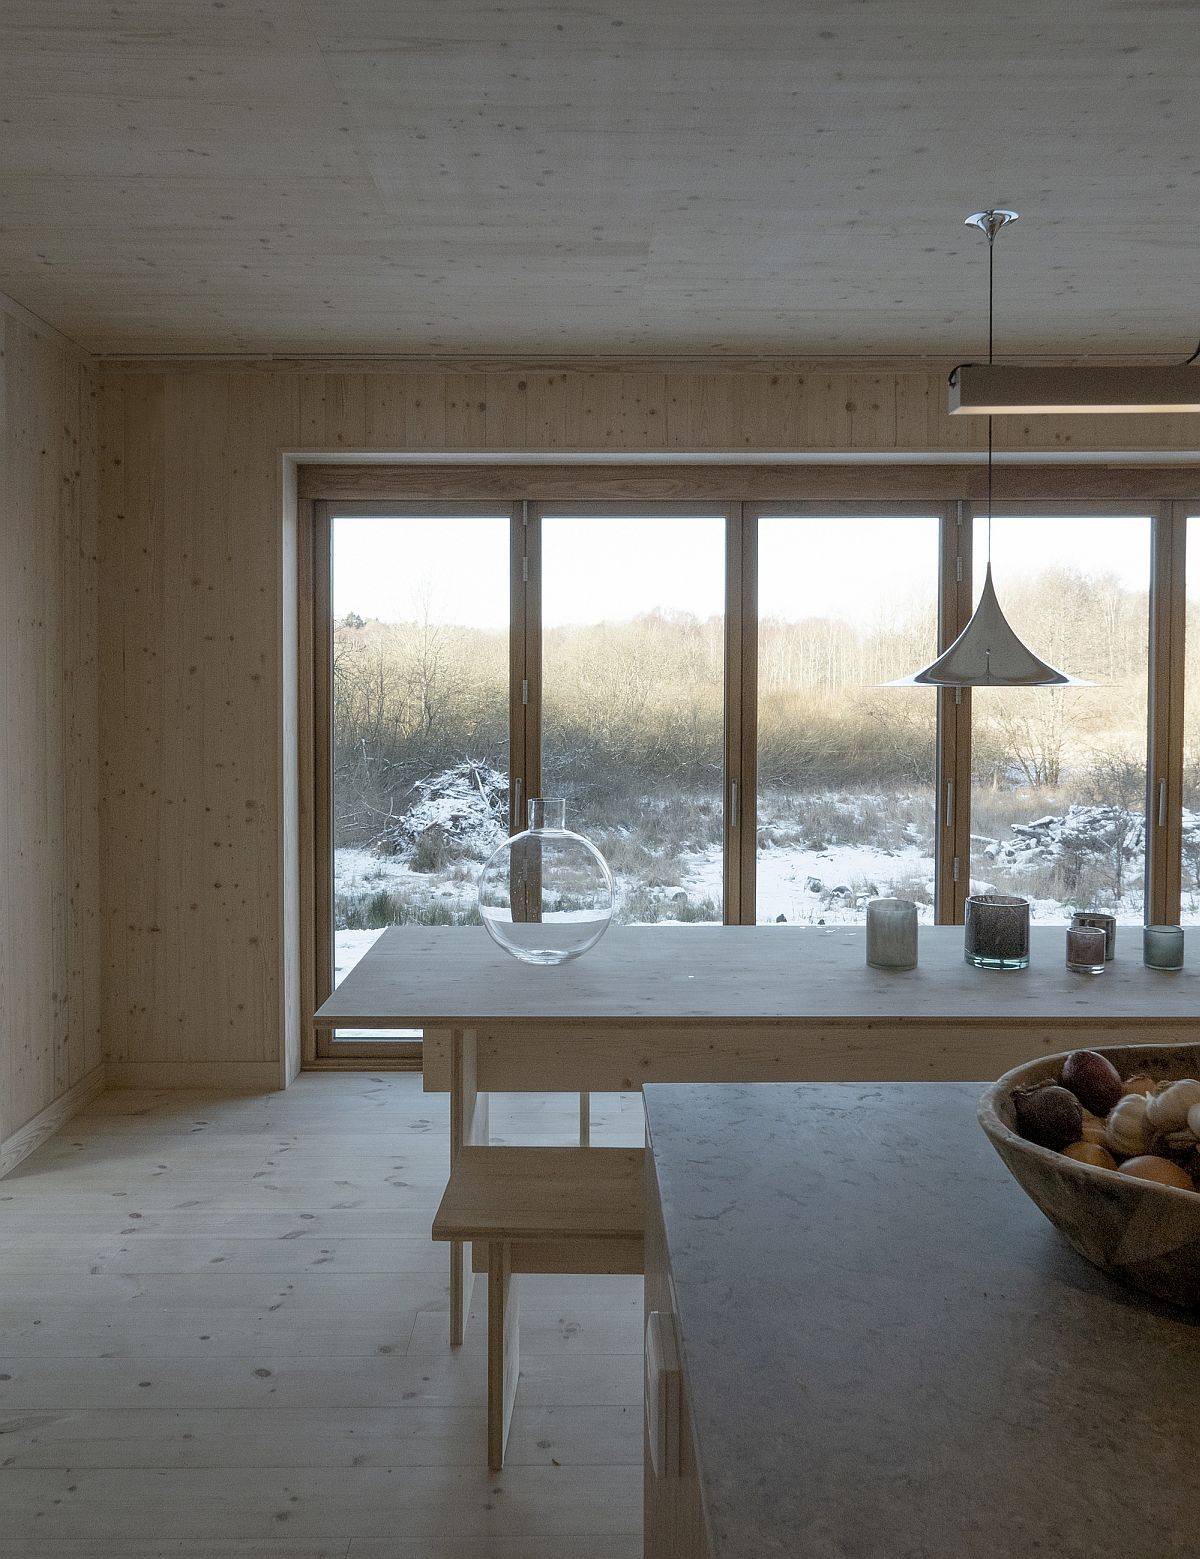 Kitchen-and-dining-area-of-the-Swedish-home-with-lovely-views-77001